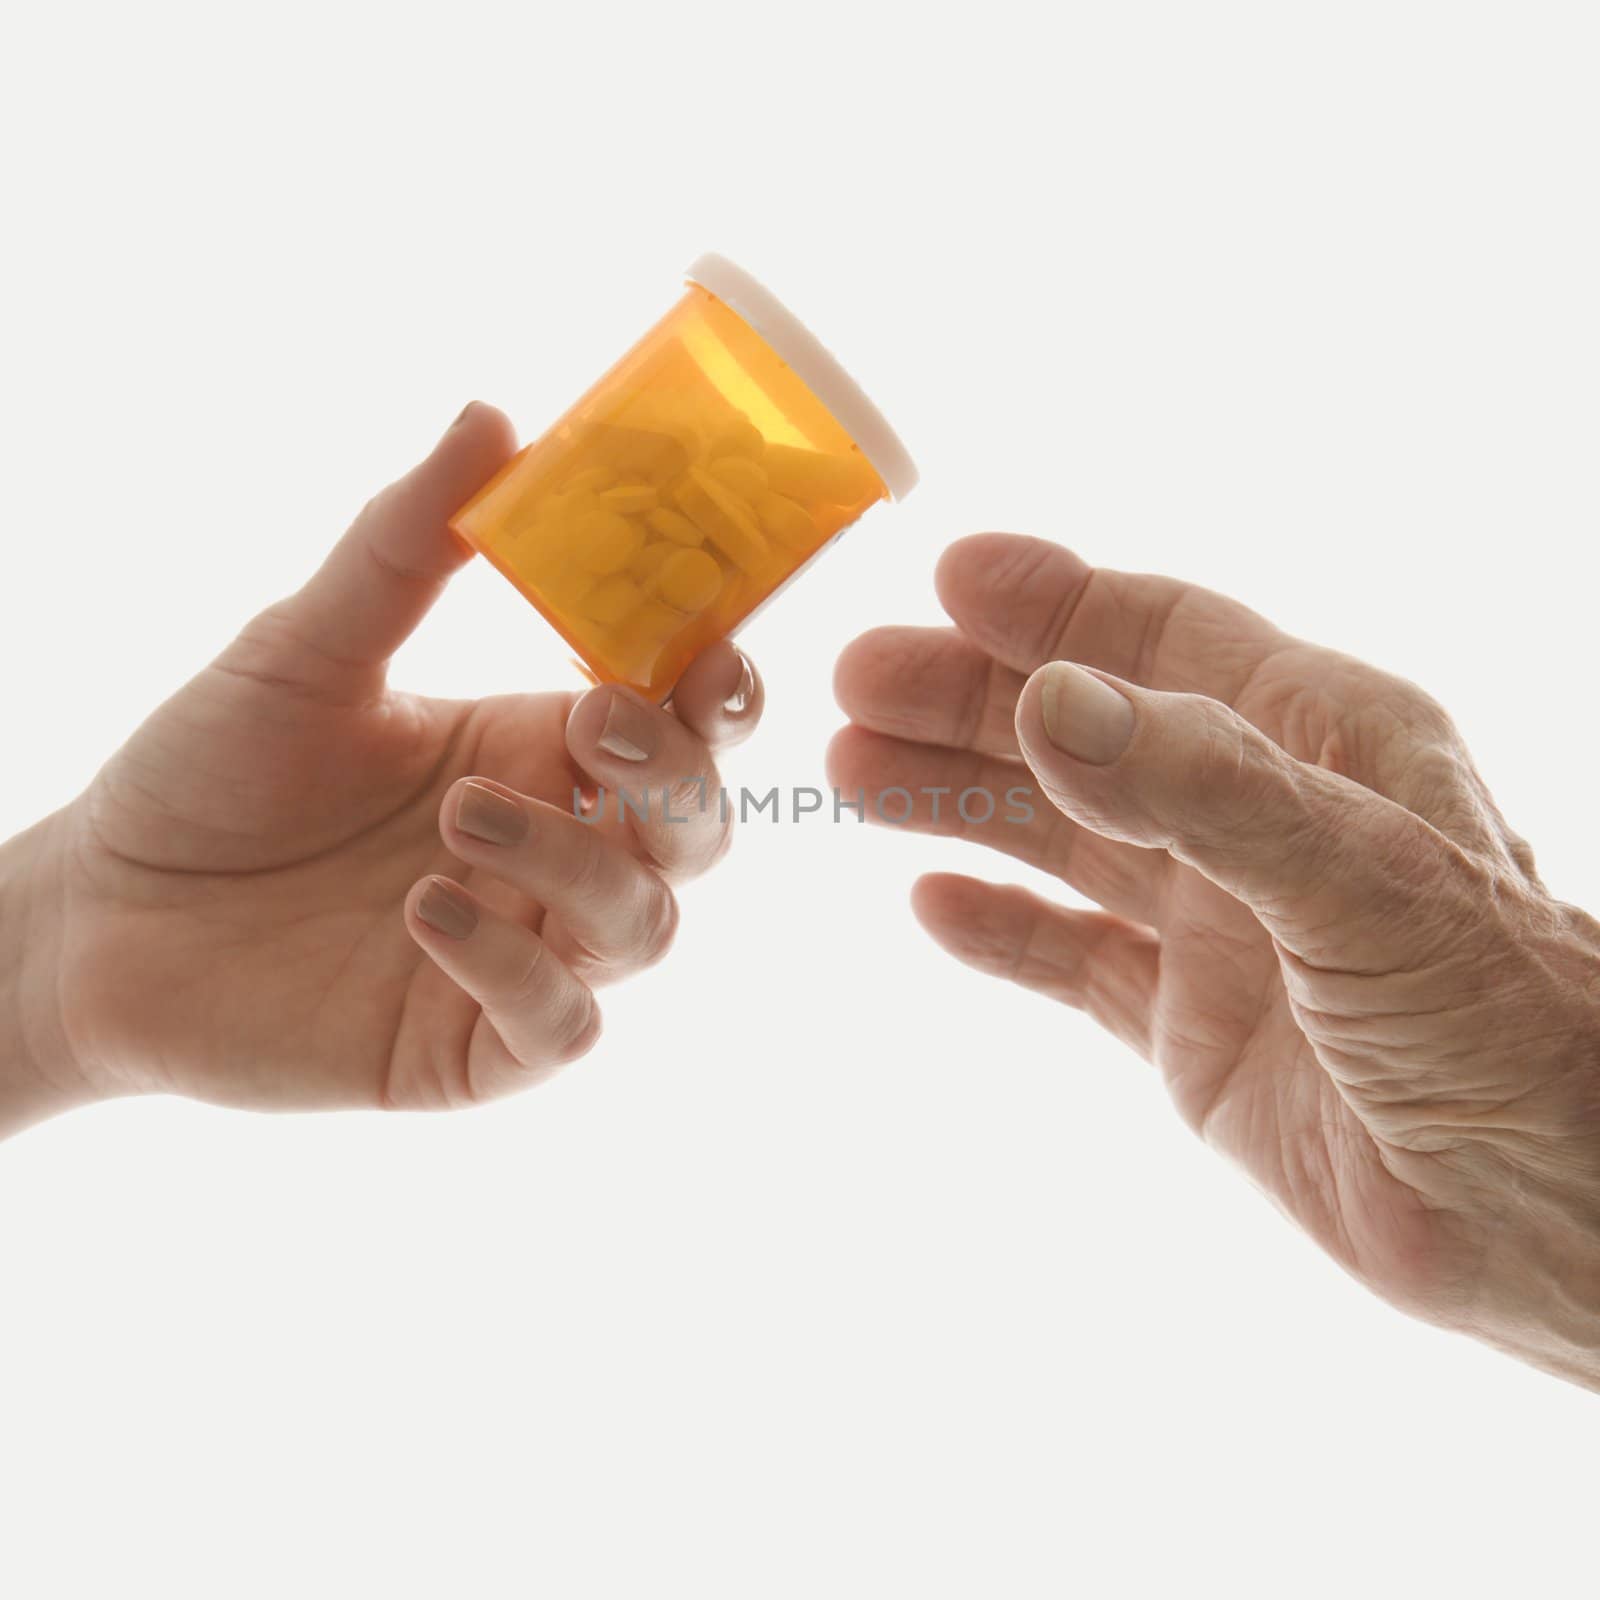 Close-up of mid-adult Caucasian female's hand handing medication bottle to elderly Caucasian male hand.